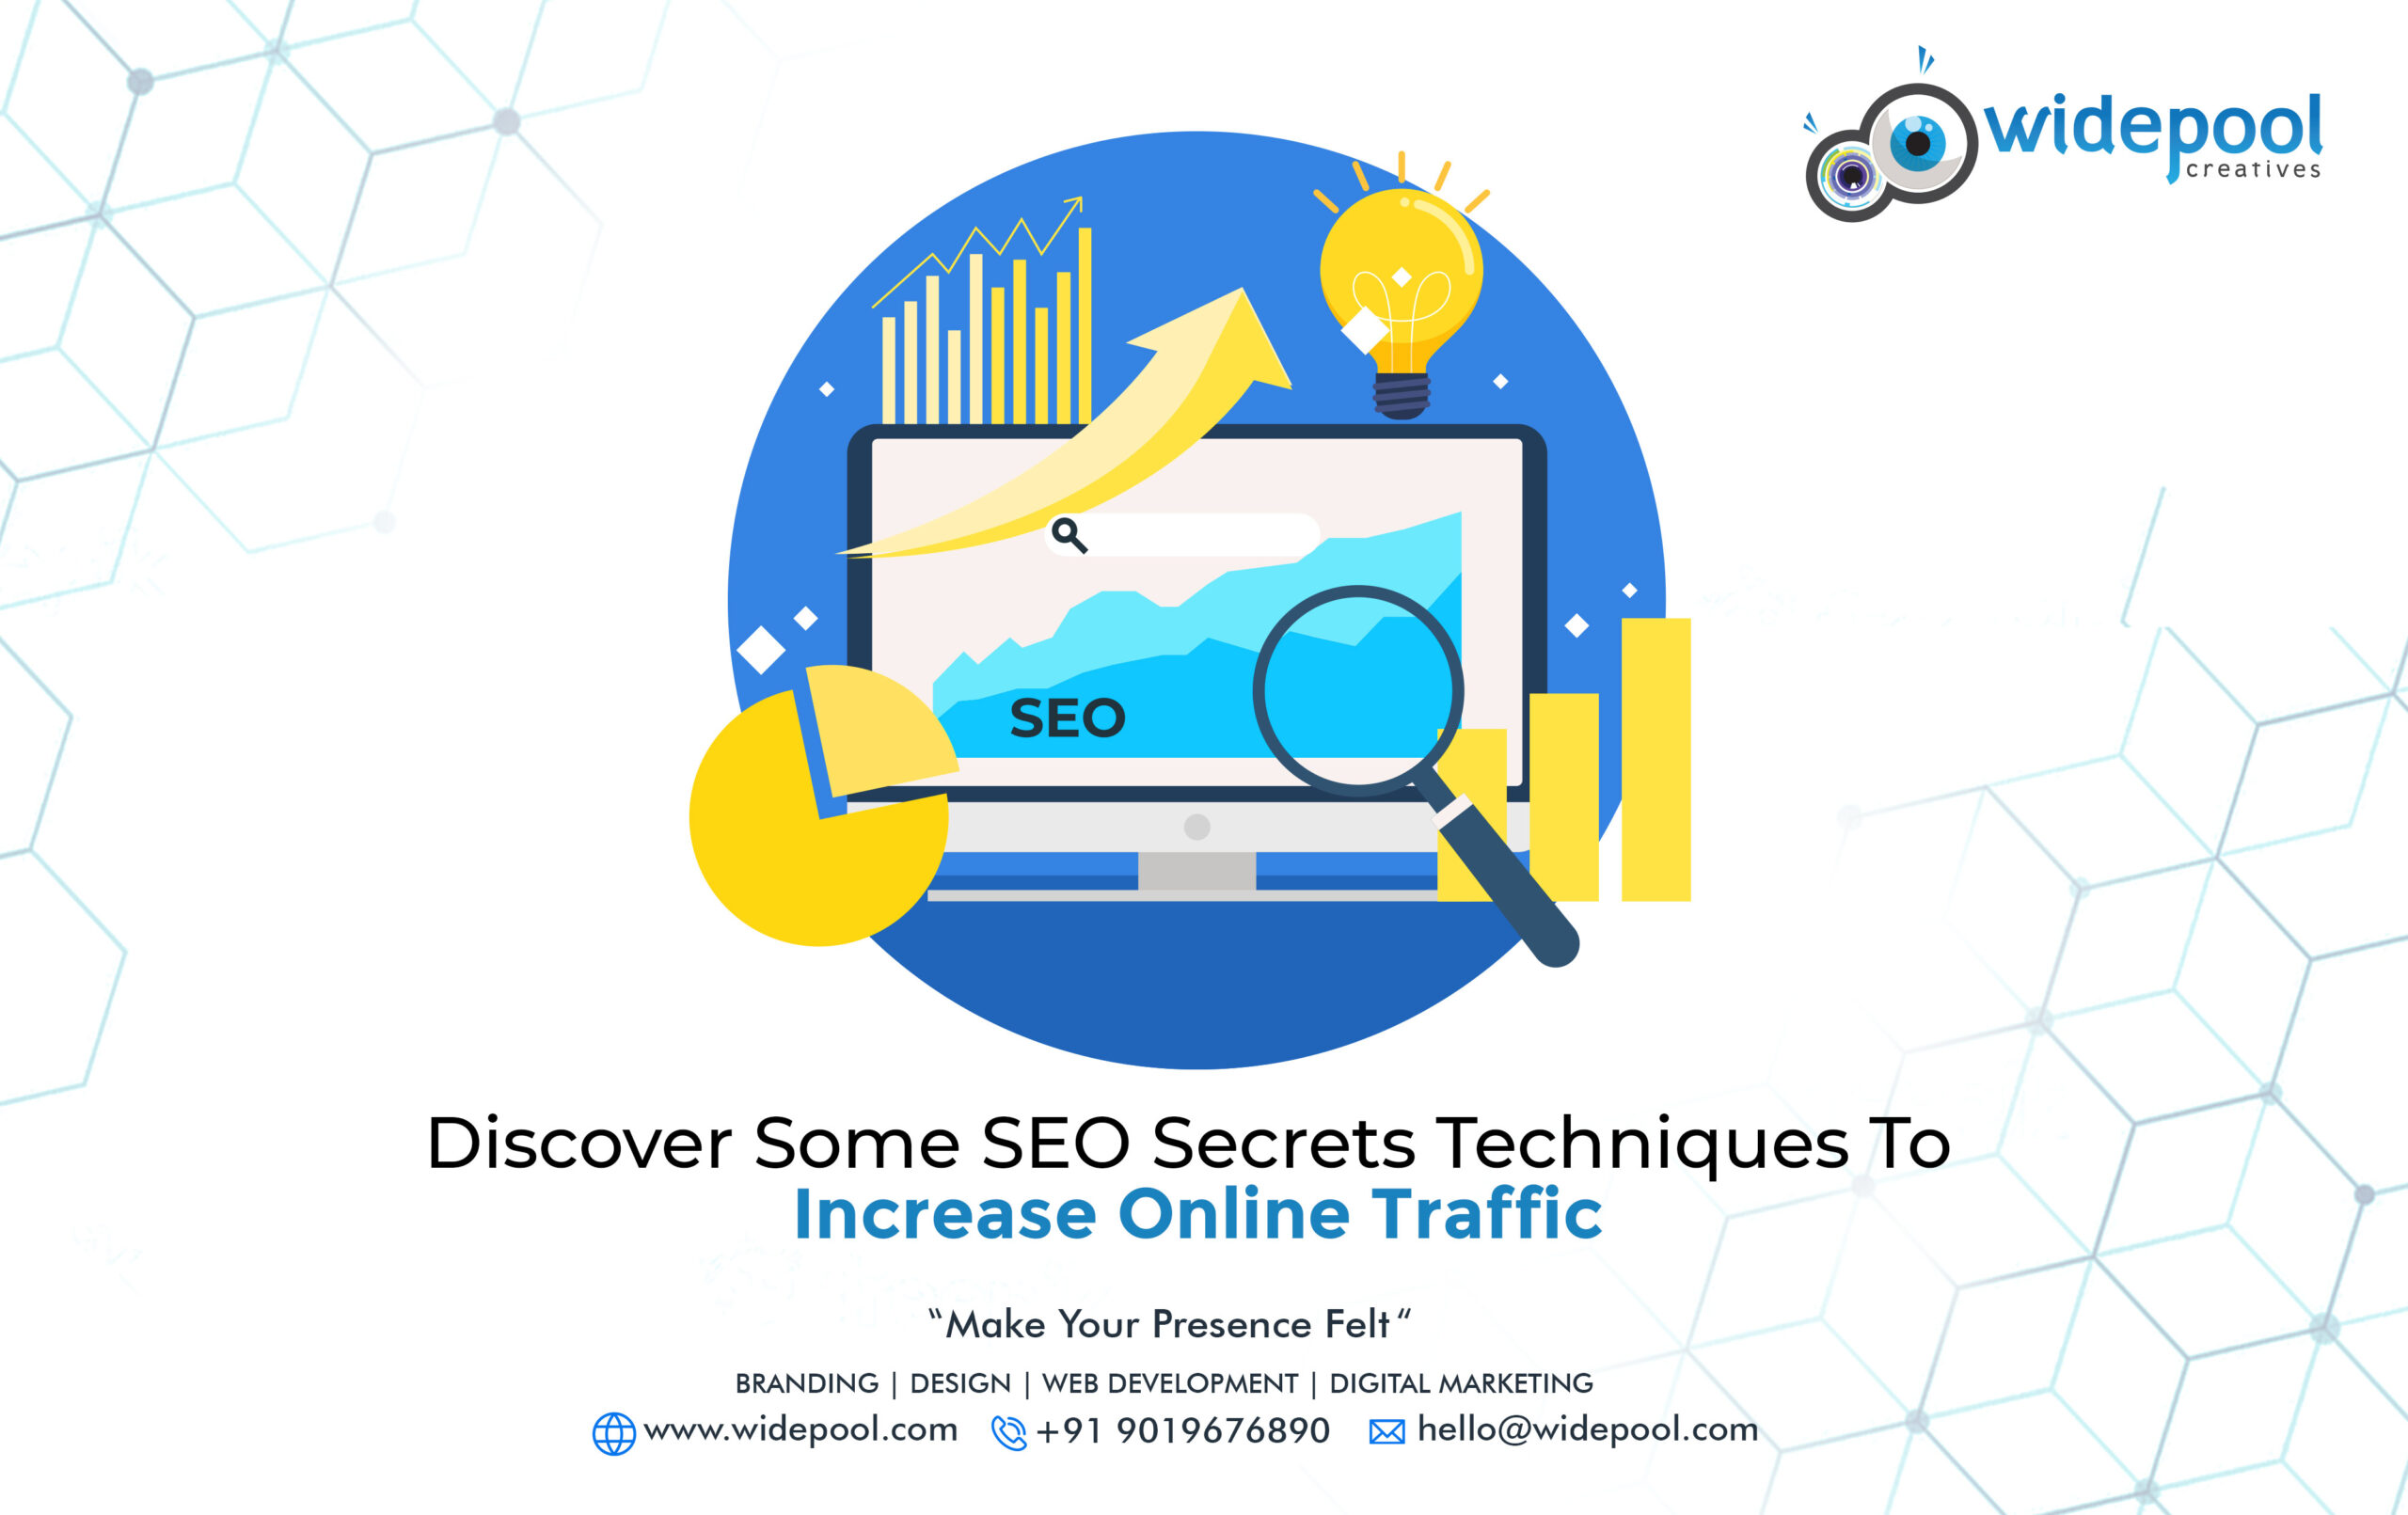 Discover Some SEO Secrets Techniques to Increase Online Traffic